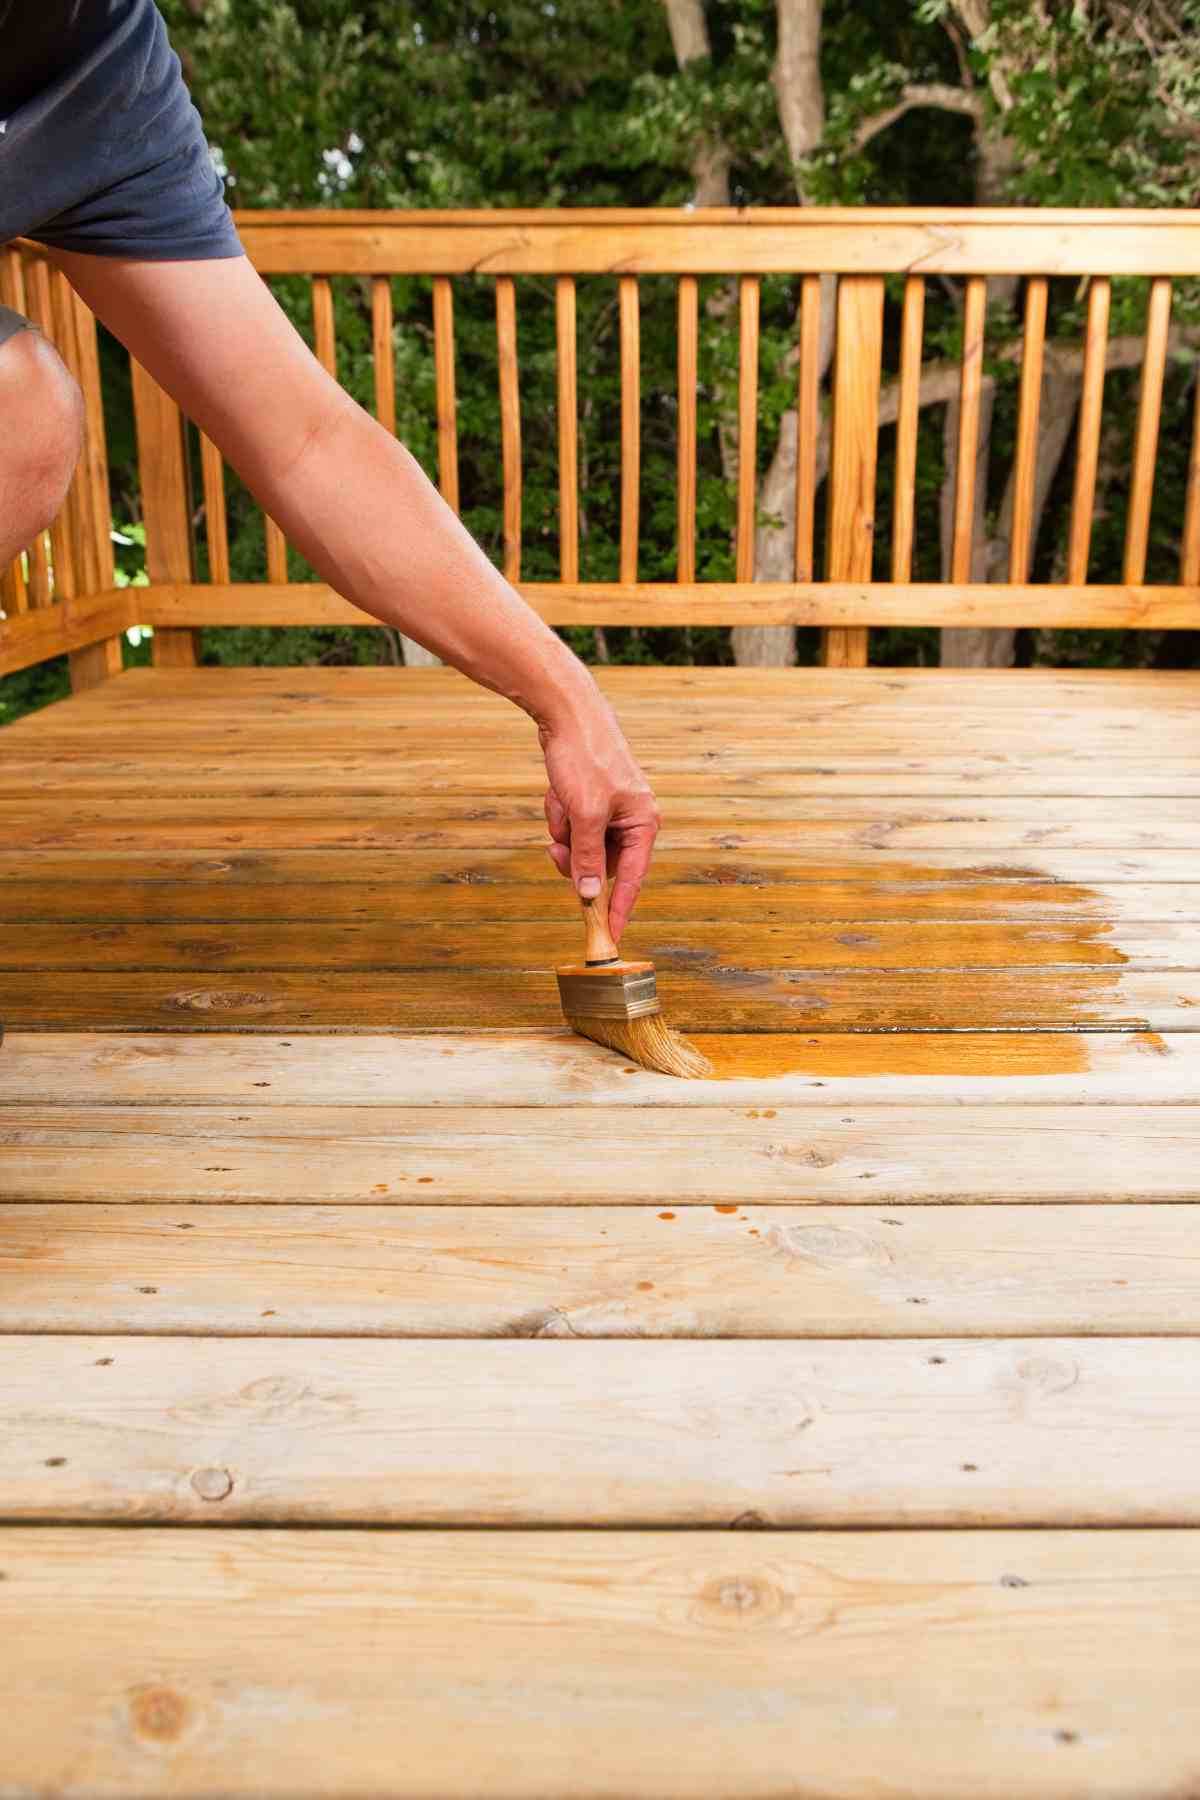 applying a sealant for added protection after cleaning the deck off pollen.